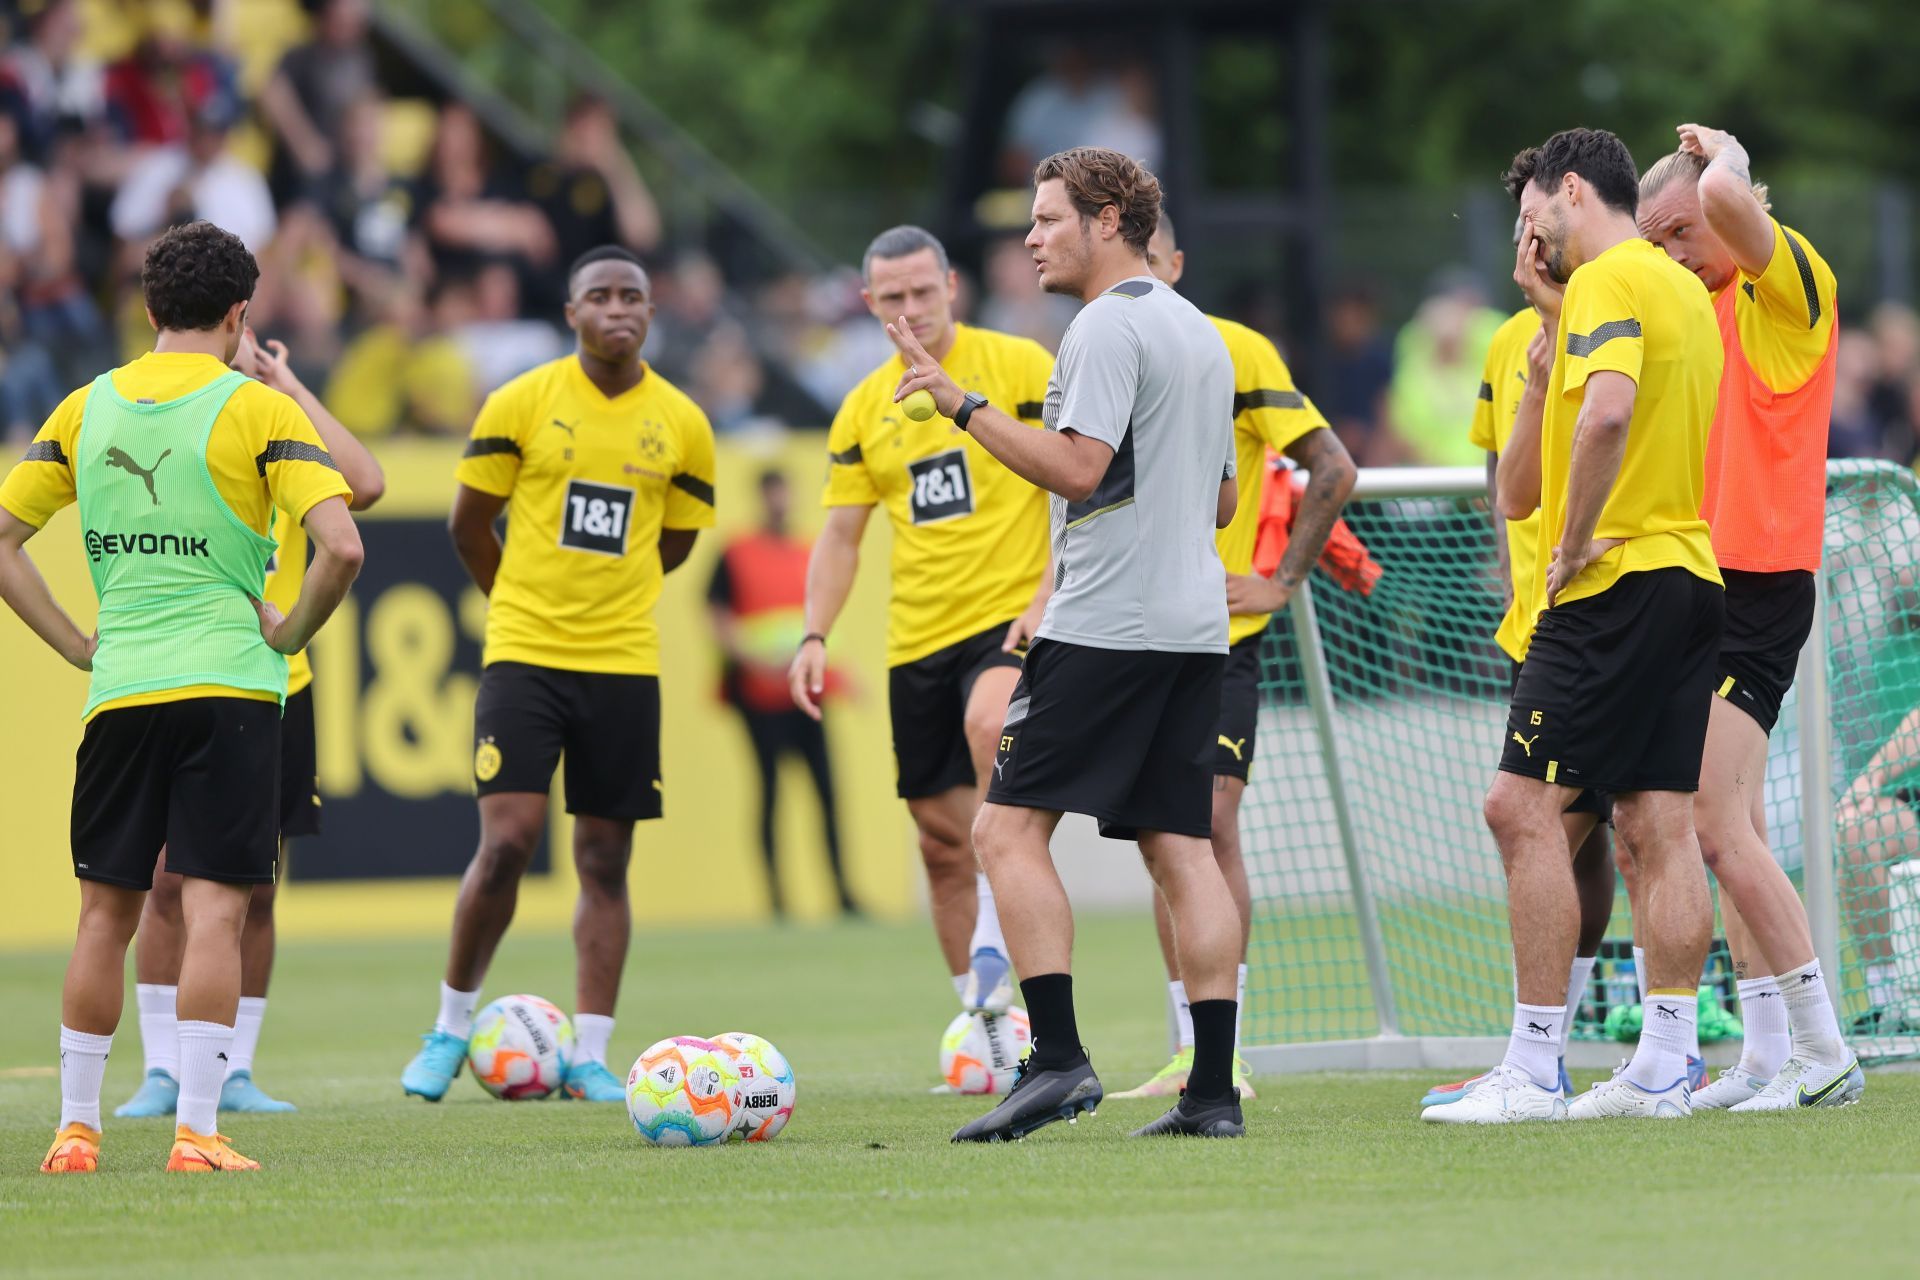 Dortmund will face Luner in a pre-season friendly on Tuesday.